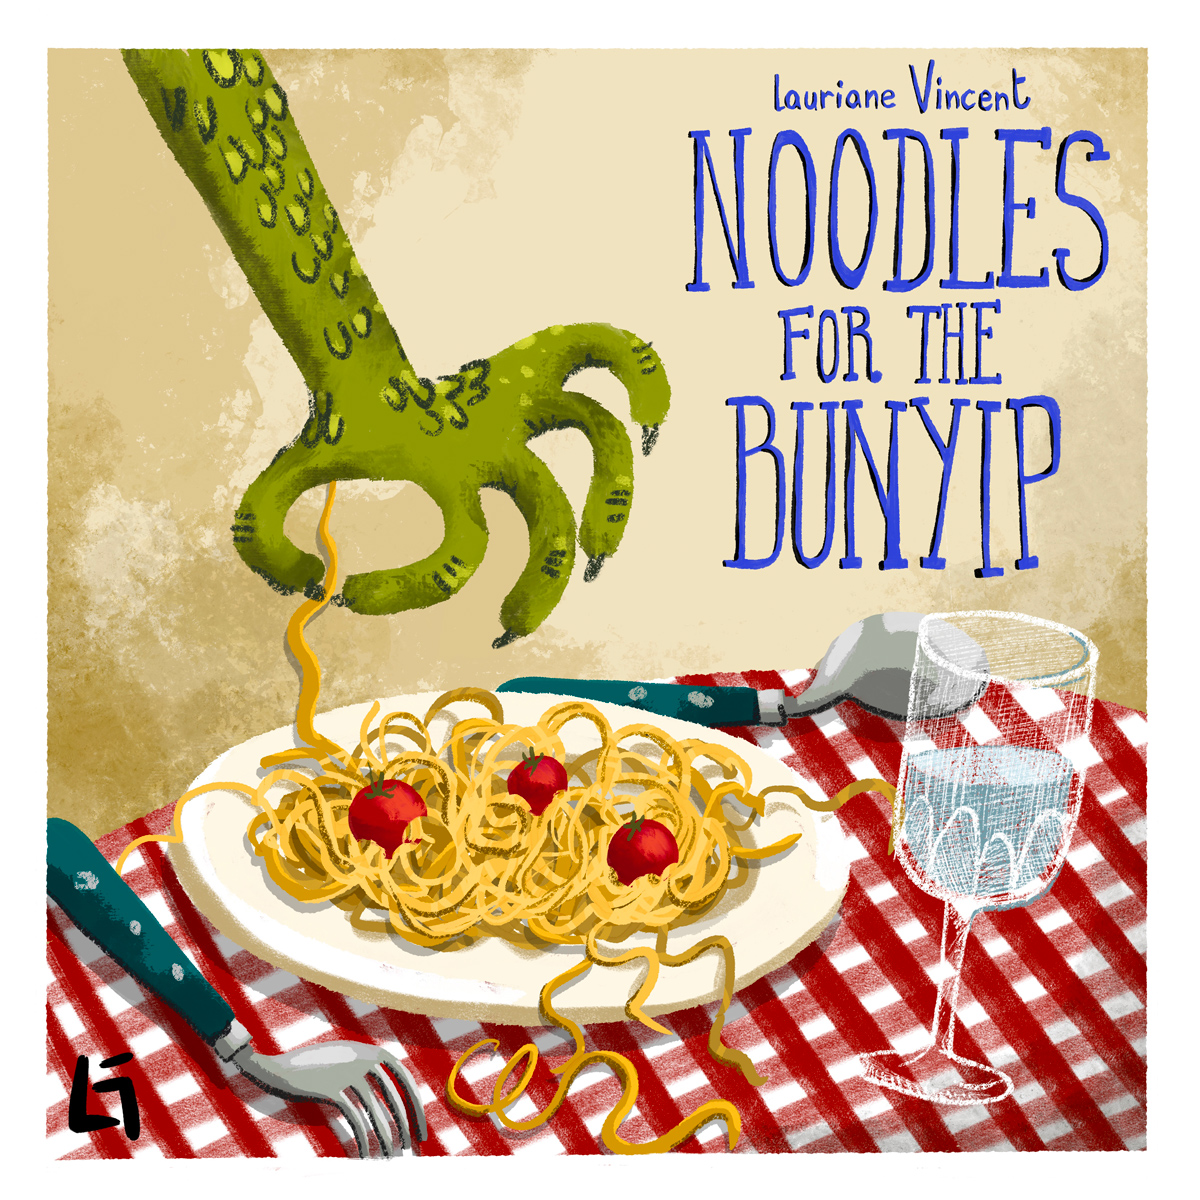 Noodles for the Bunyip